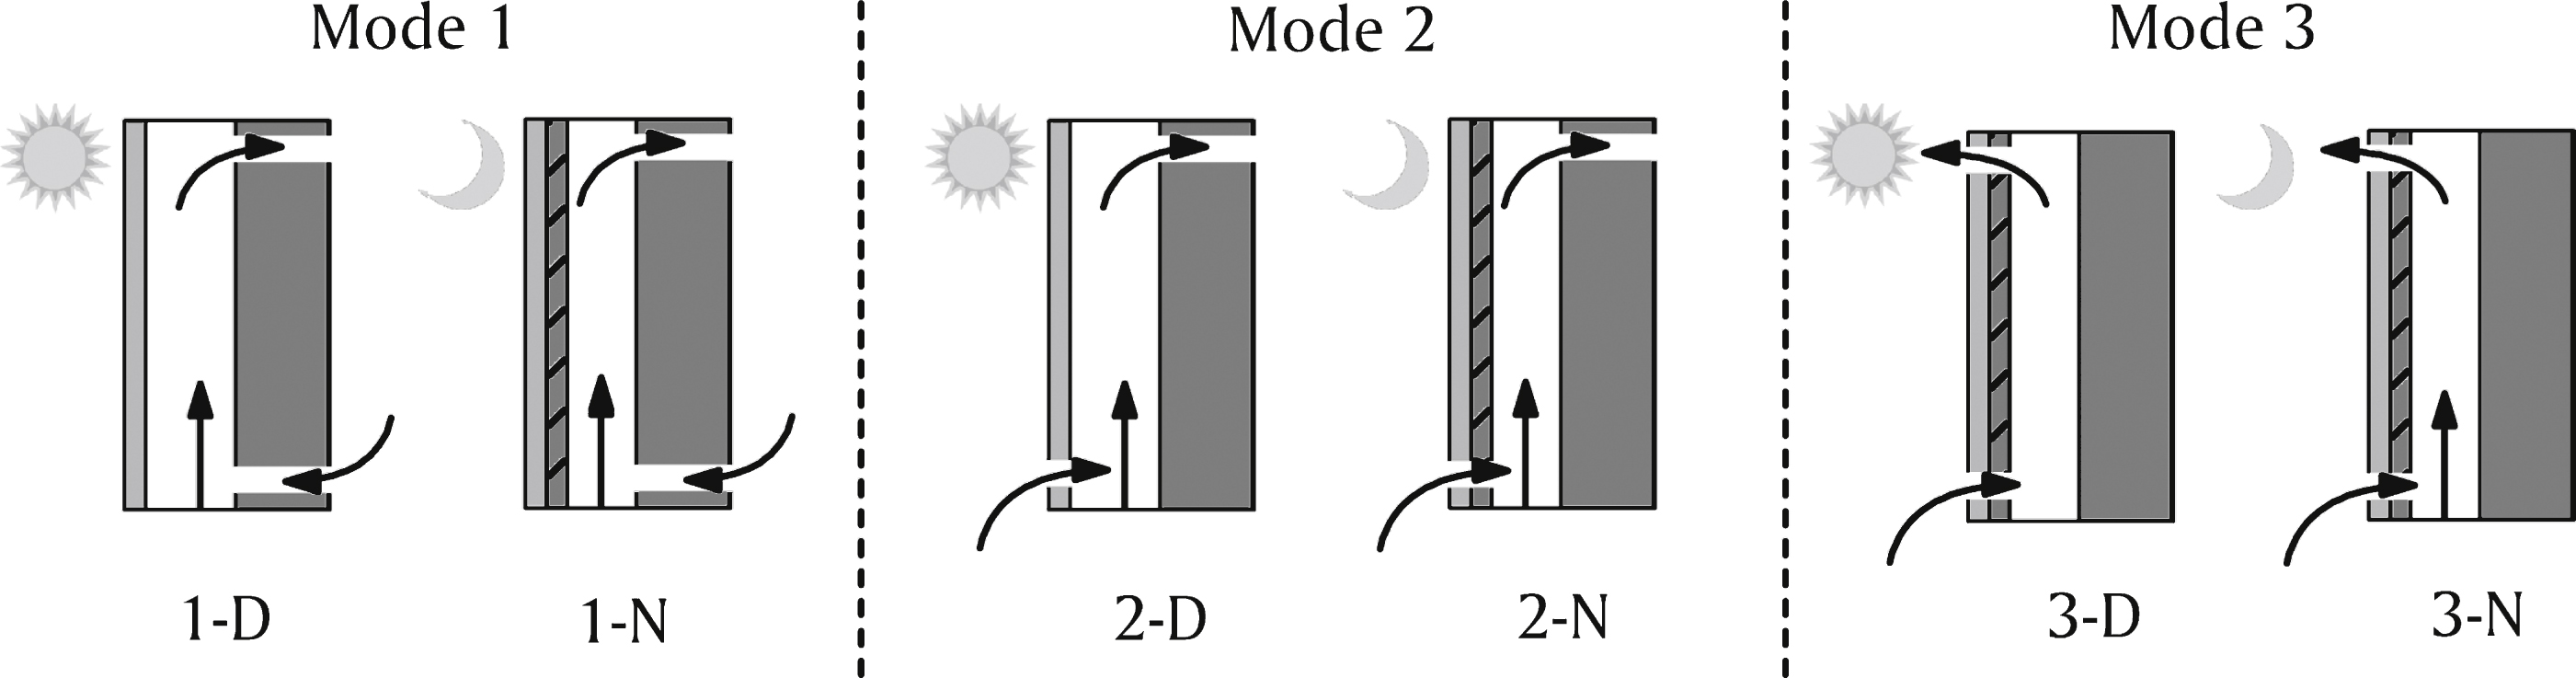 Schematic layout of the three operational modes and six sub-modes.